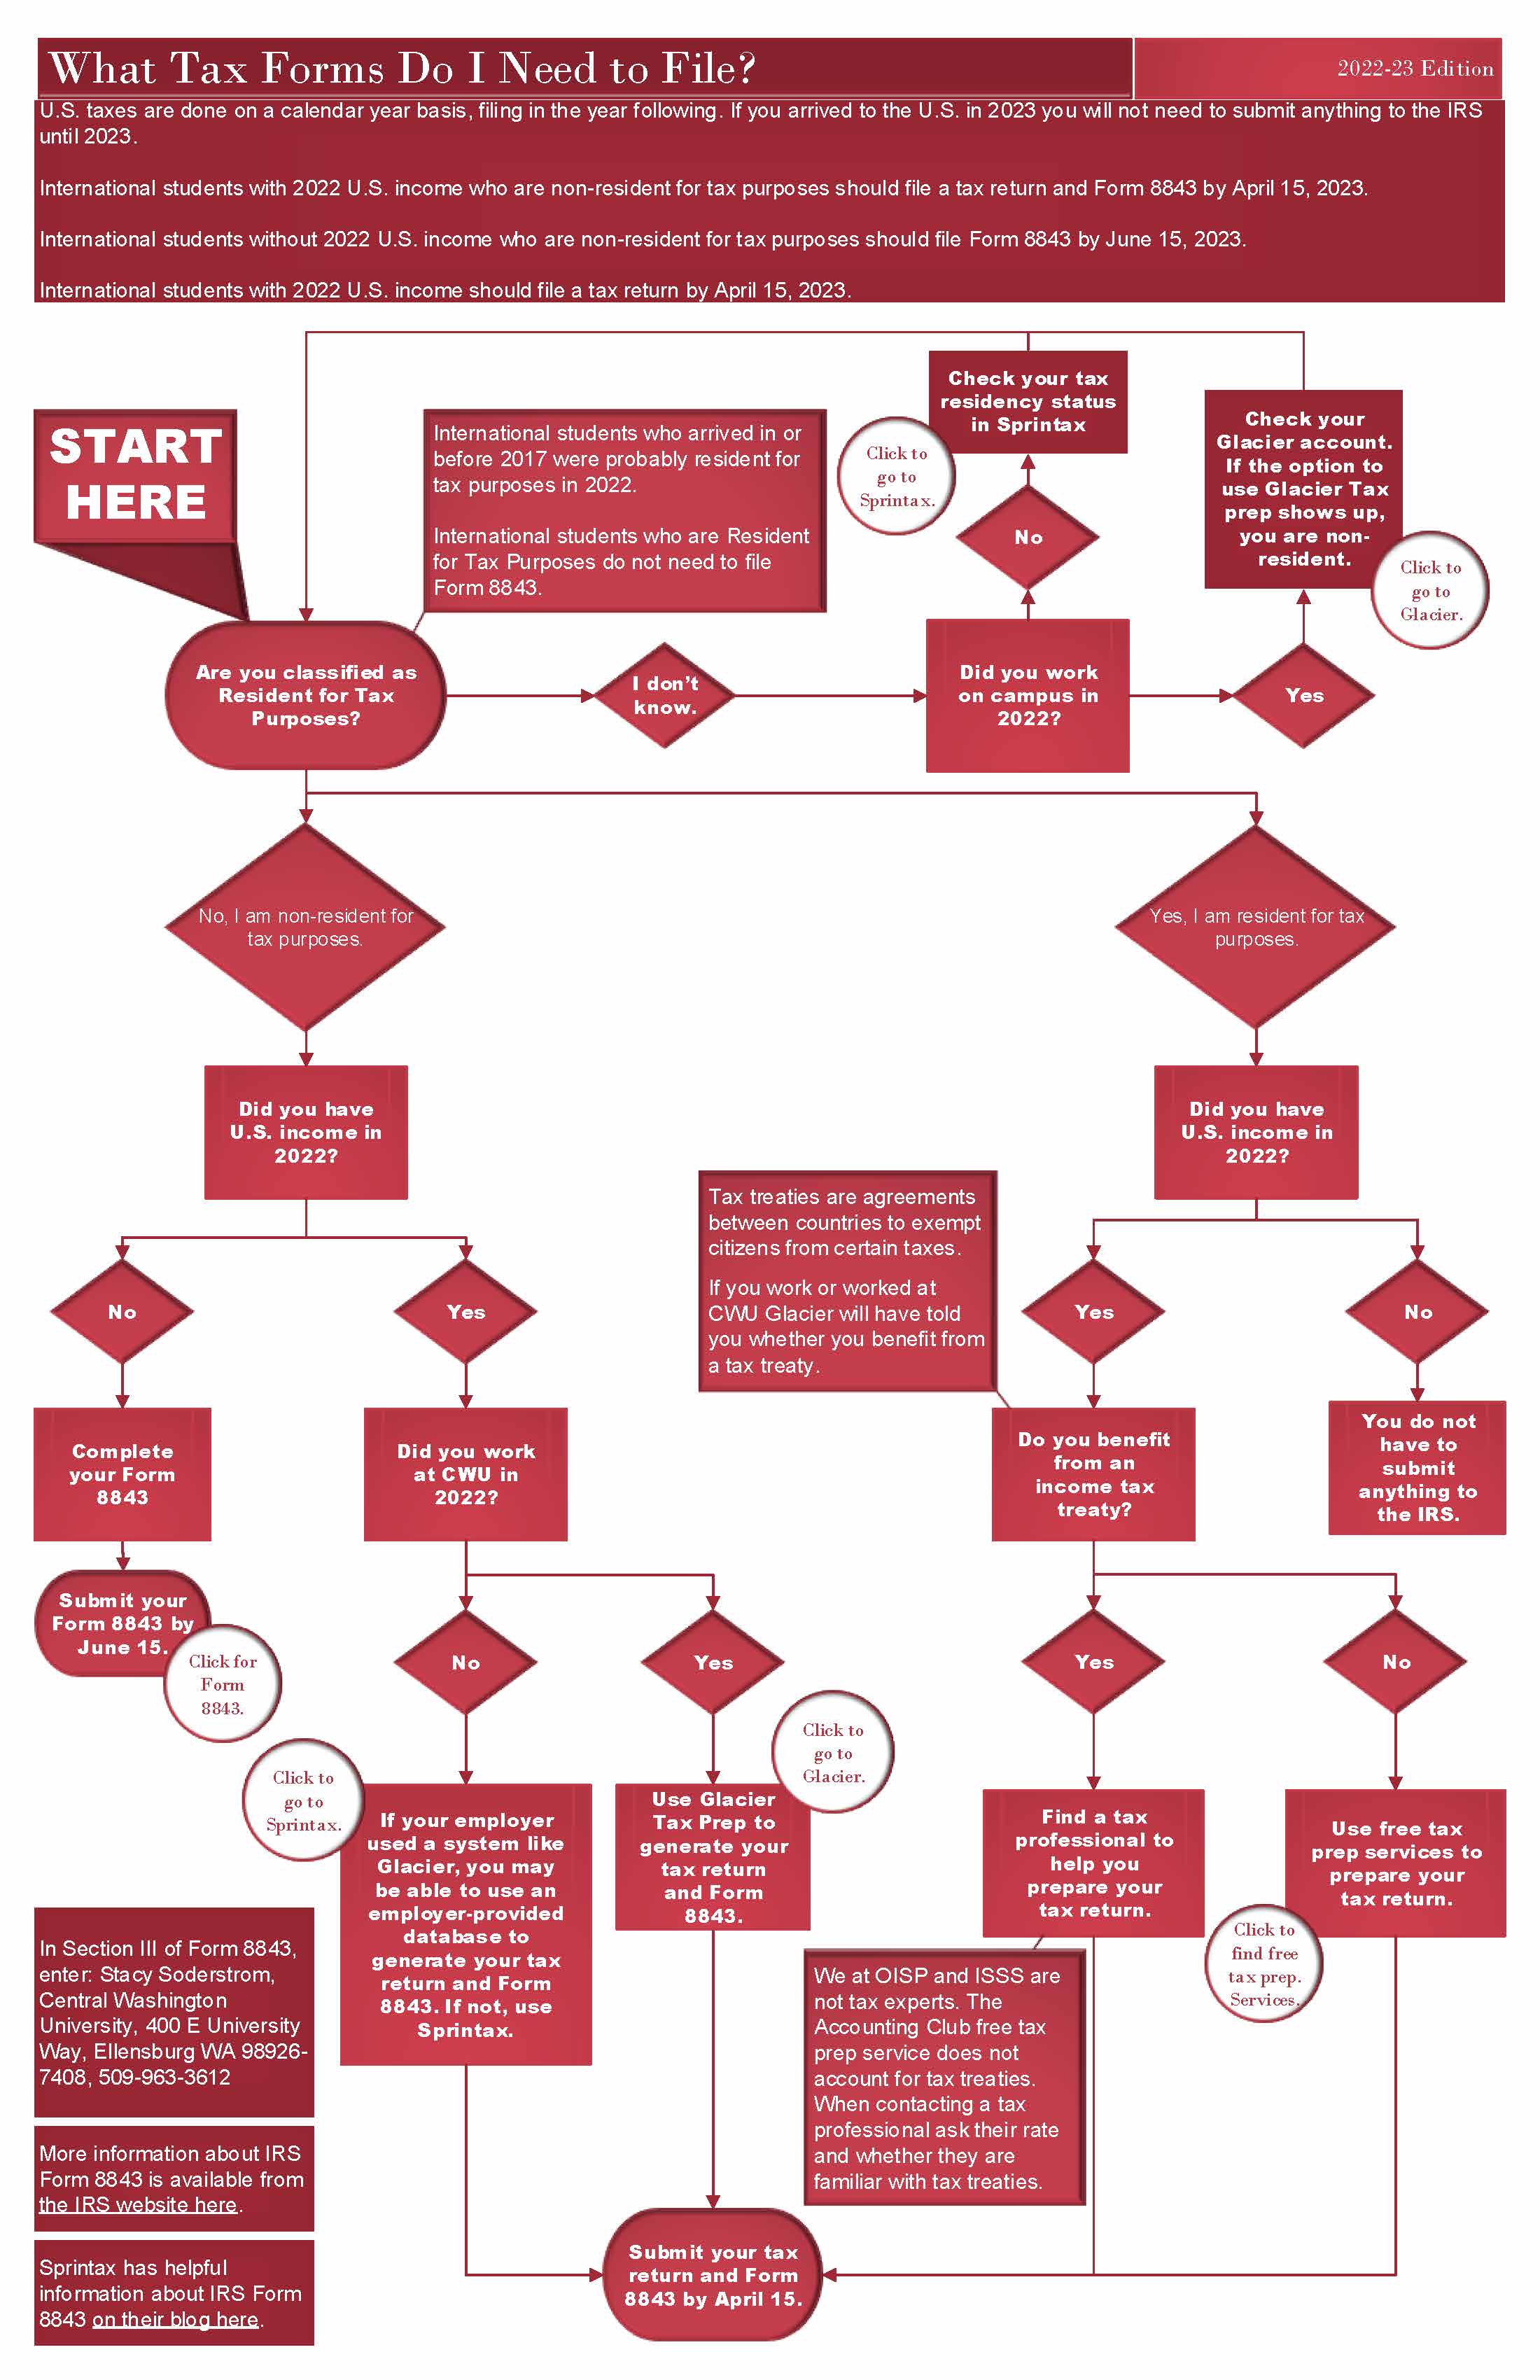 Flow chart to help international students determine which tax forms they need to file. Click on image to open pdf version of this image.